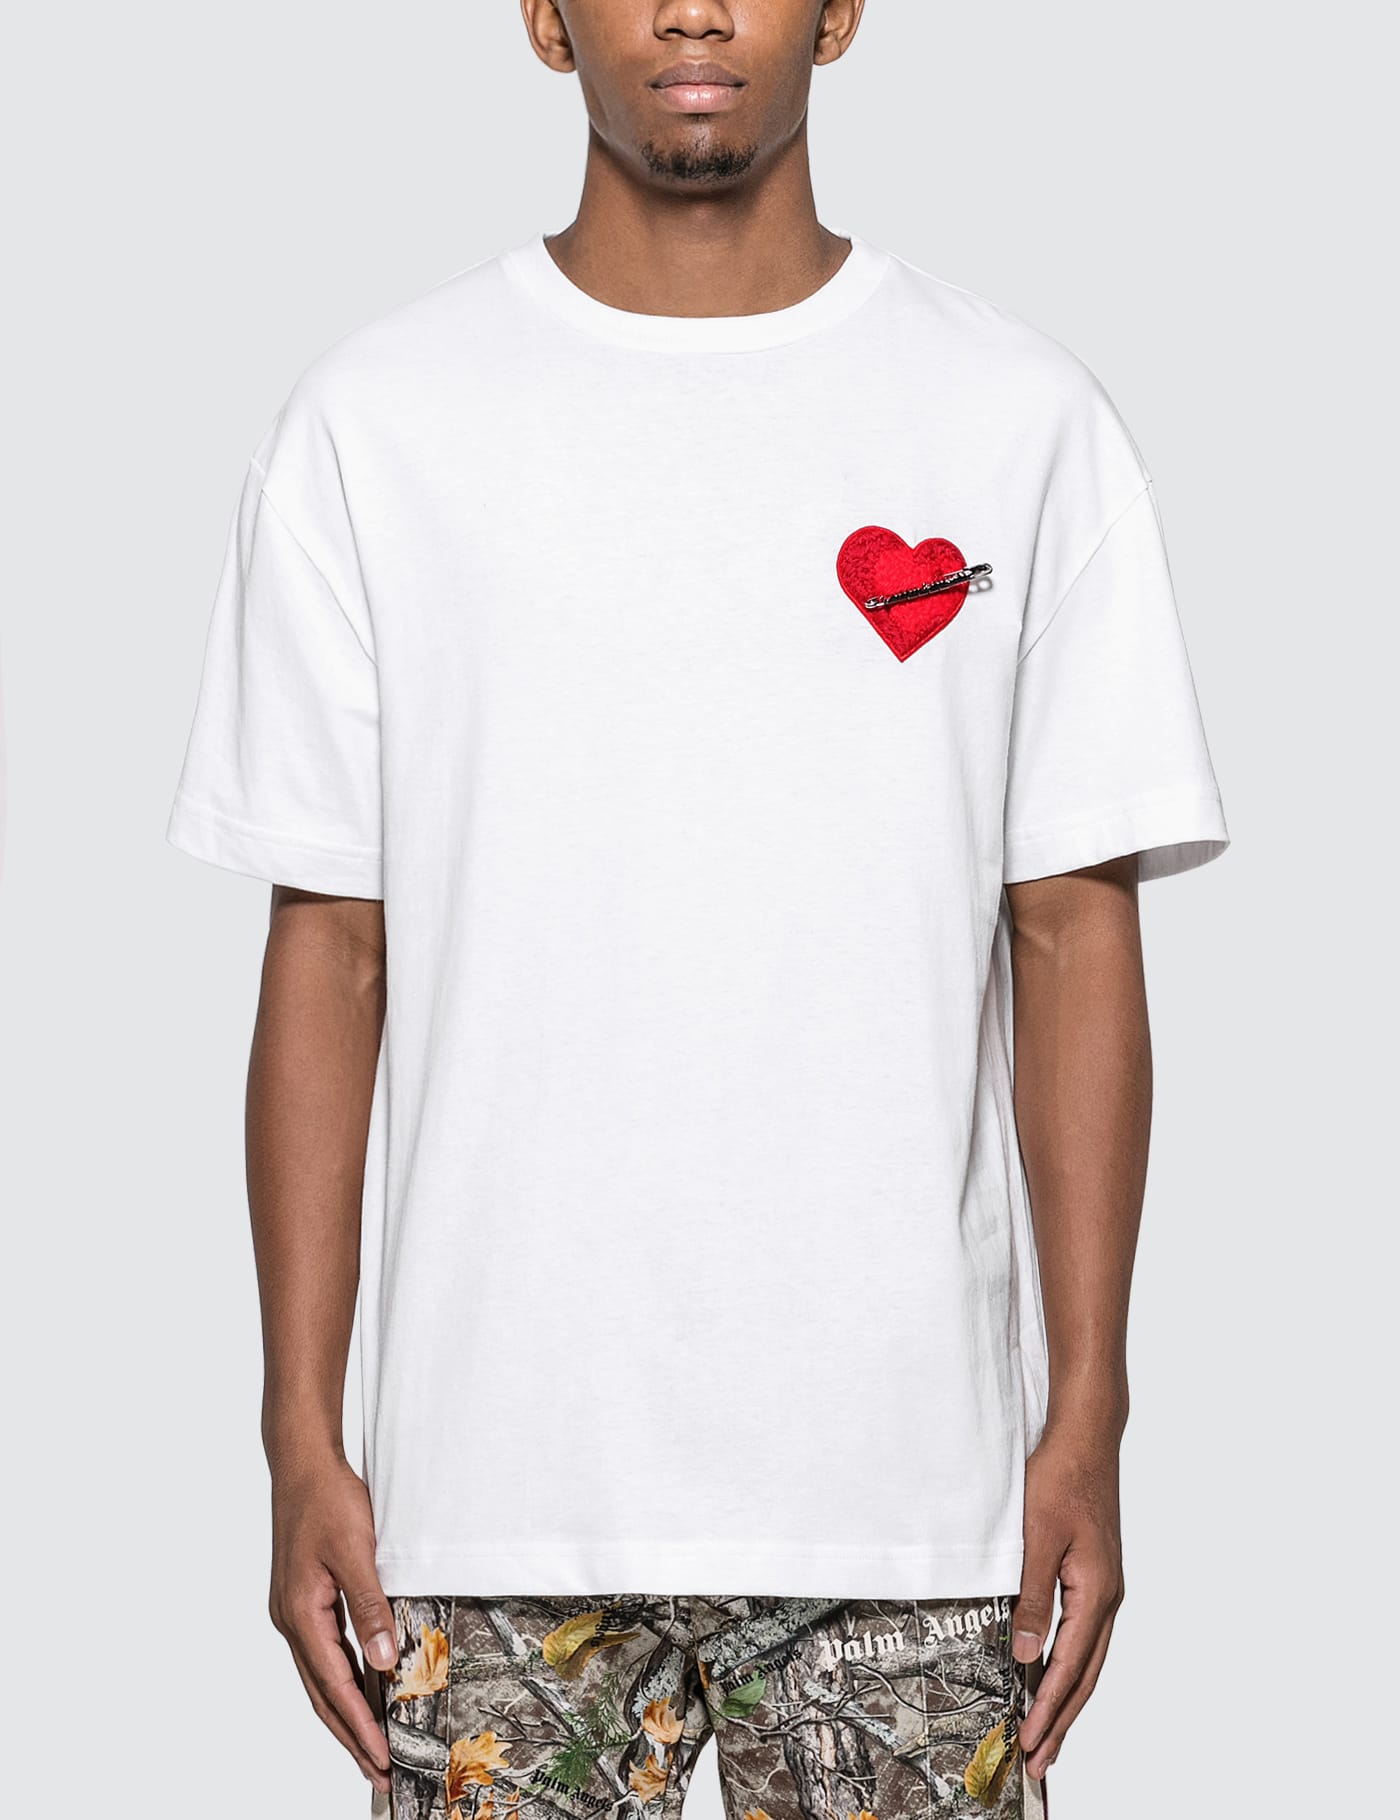 Palm Angels - Pin My Heart T-Shirt | HBX - Globally Curated 